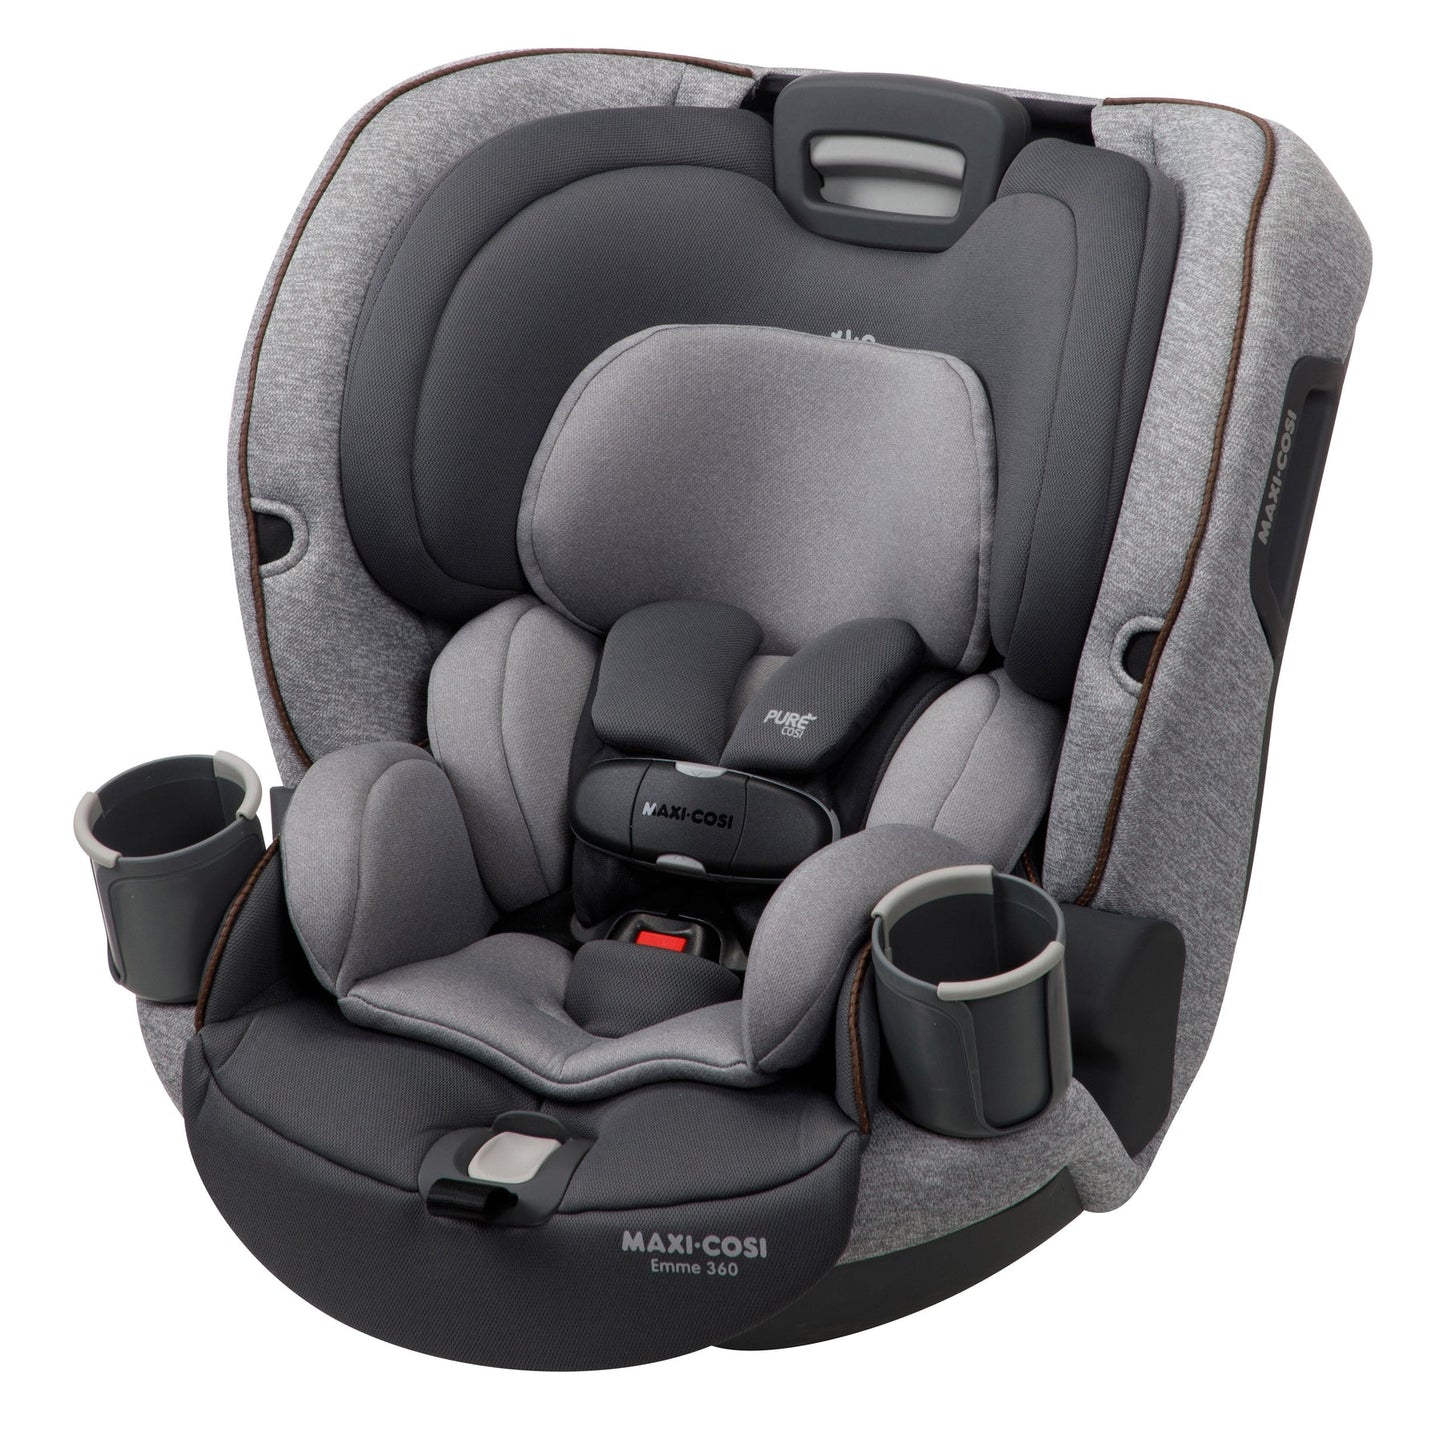 Maxi Cosi Emme 360 All-in-One Convertible Car Seat